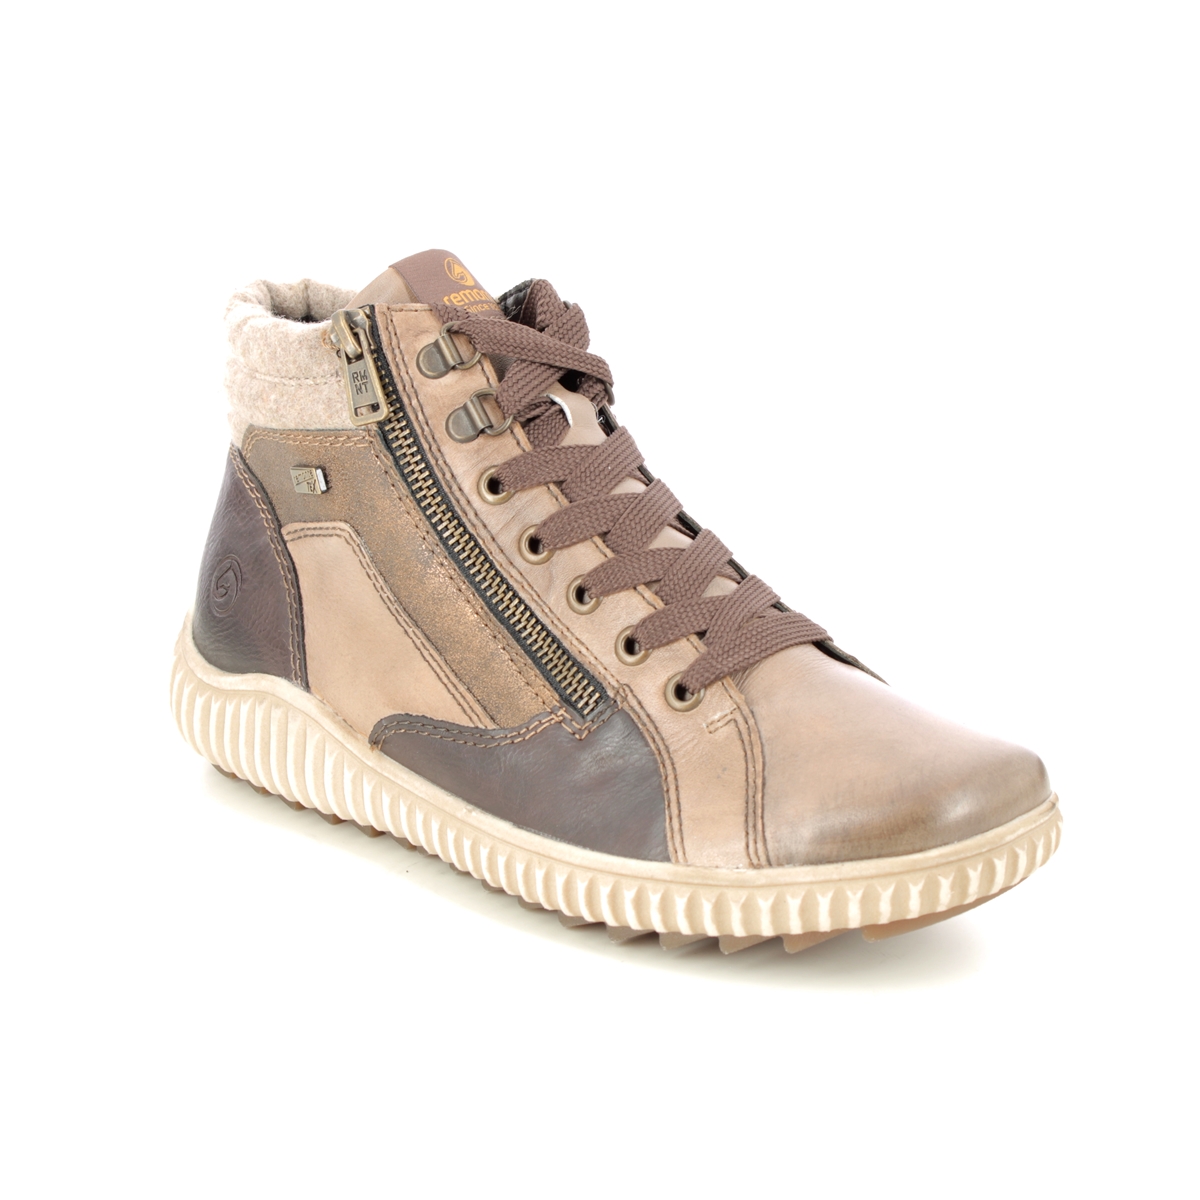 Remonte Wiser Zip Tex Light Taupe Leather Womens Hi Tops R8271-20 In Size 37 In Plain Light Taupe Leather